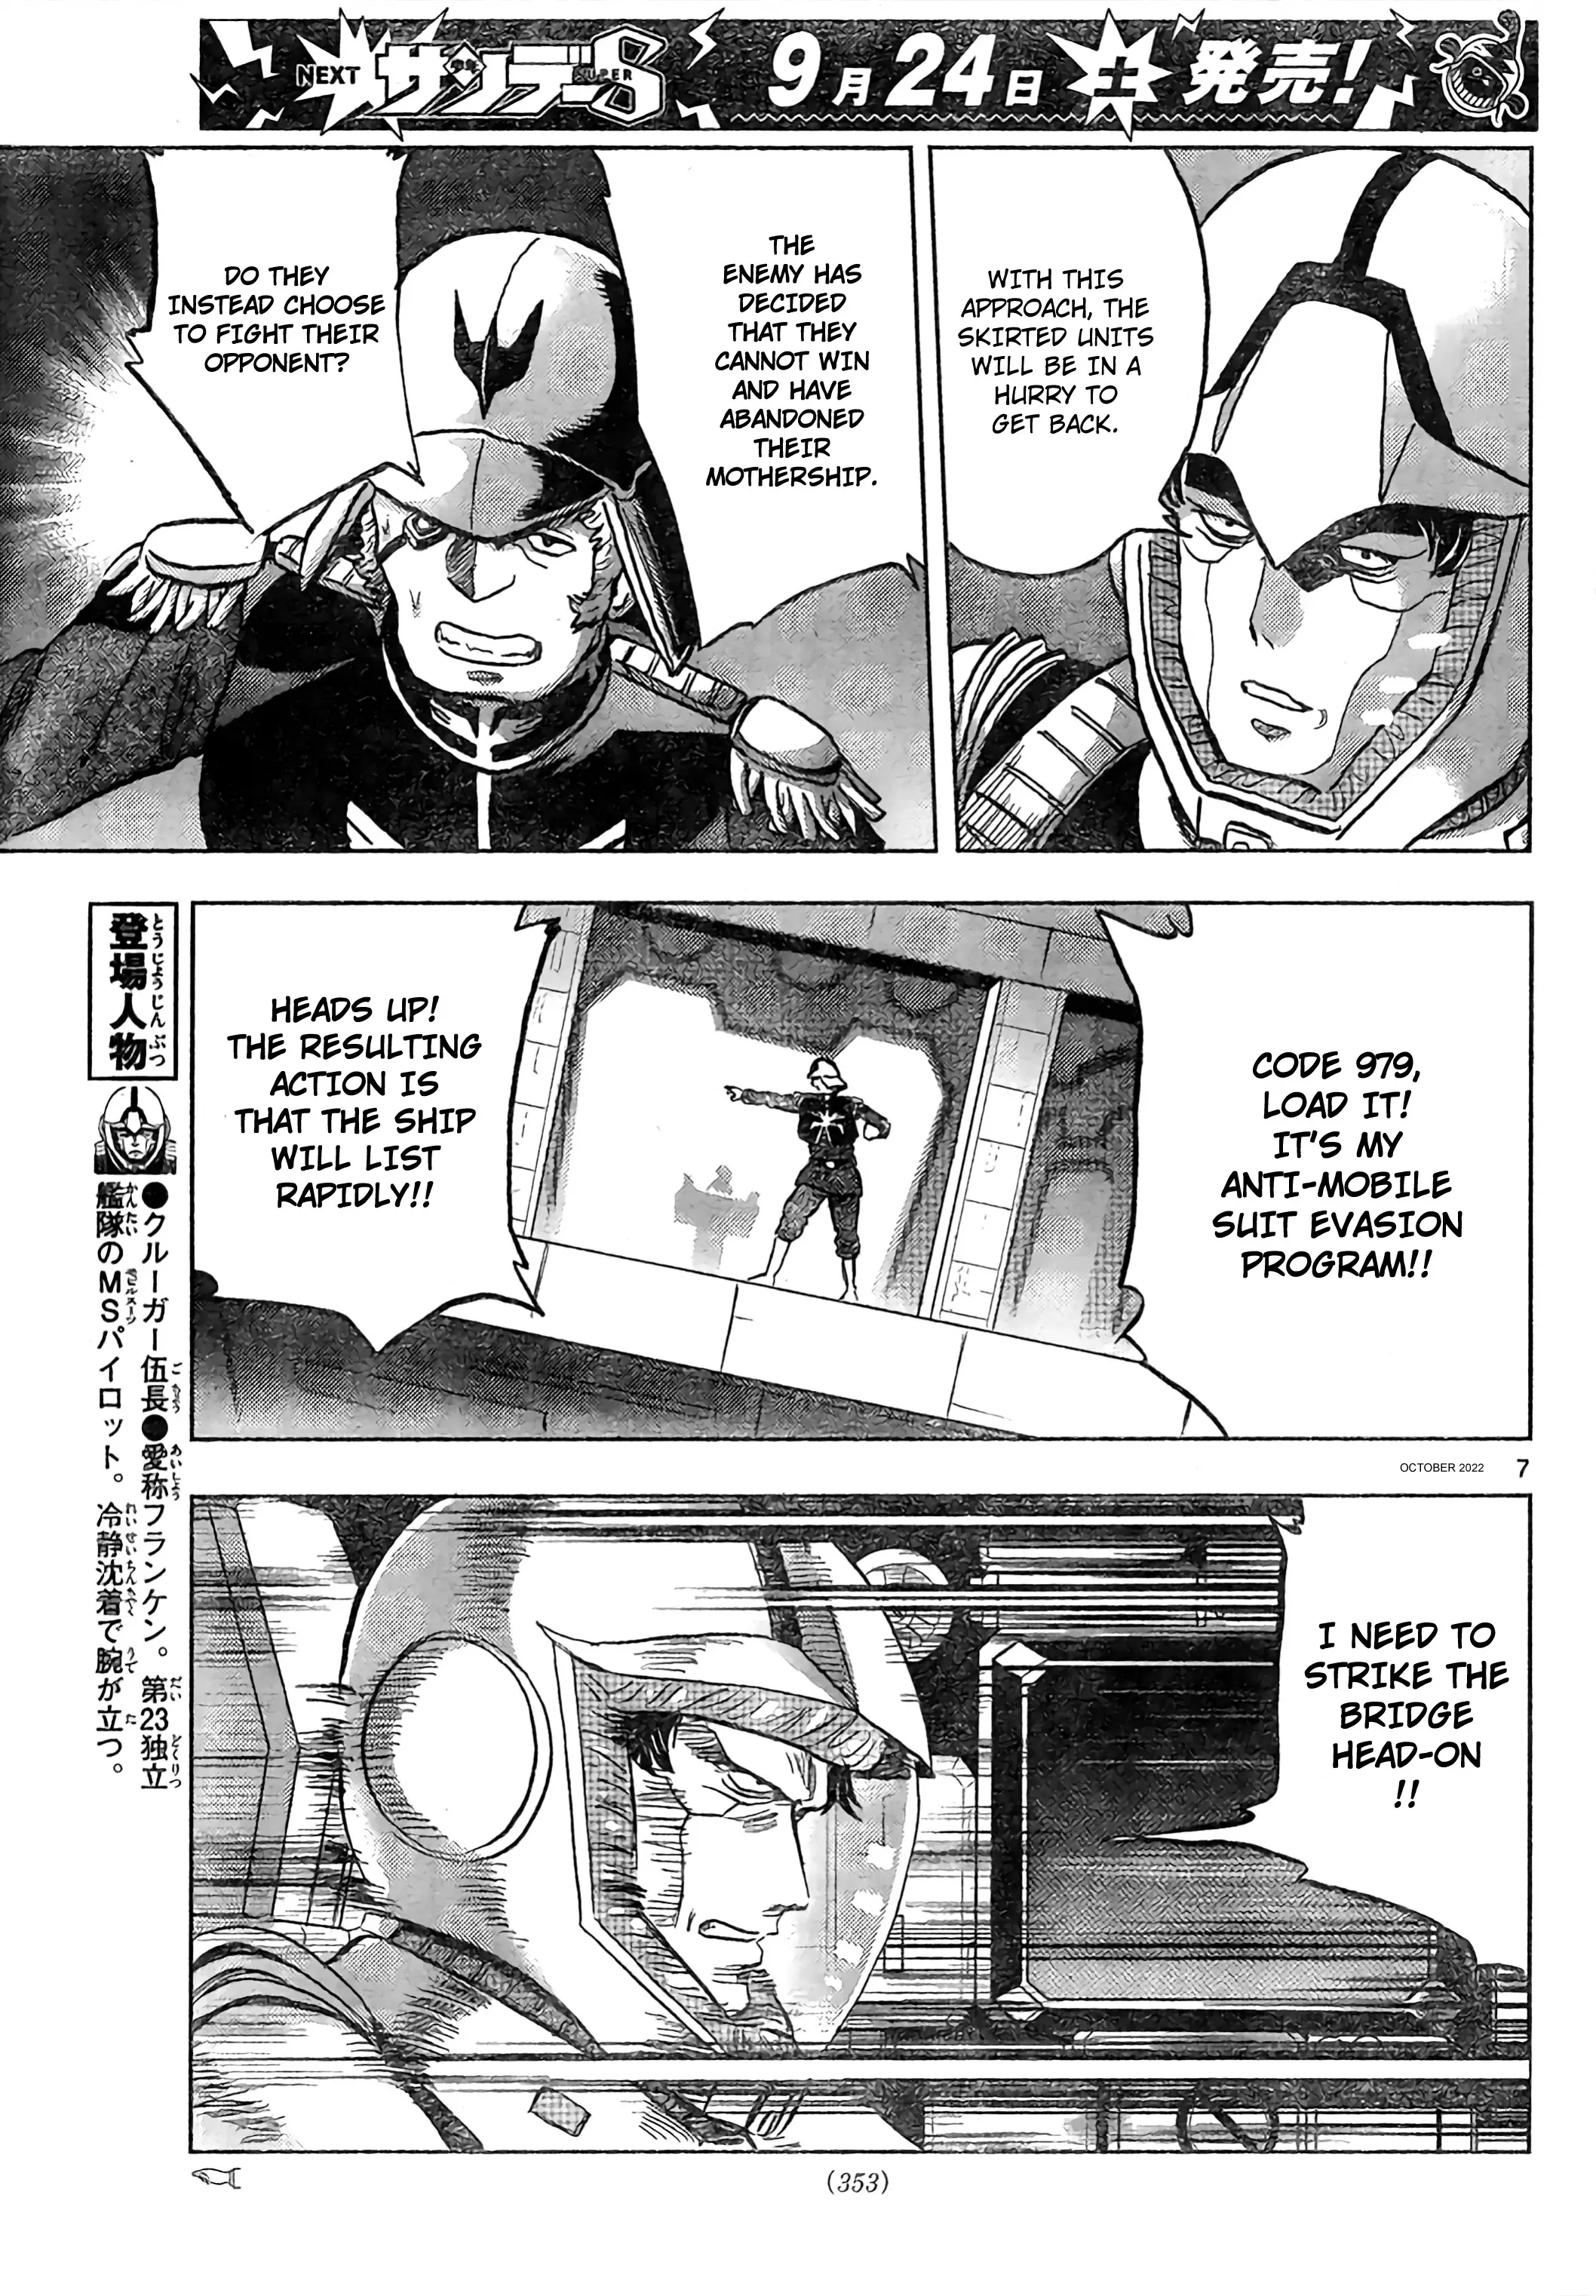 Mobile Suit Gundam Aggressor - 88 page 7-bf4493a1